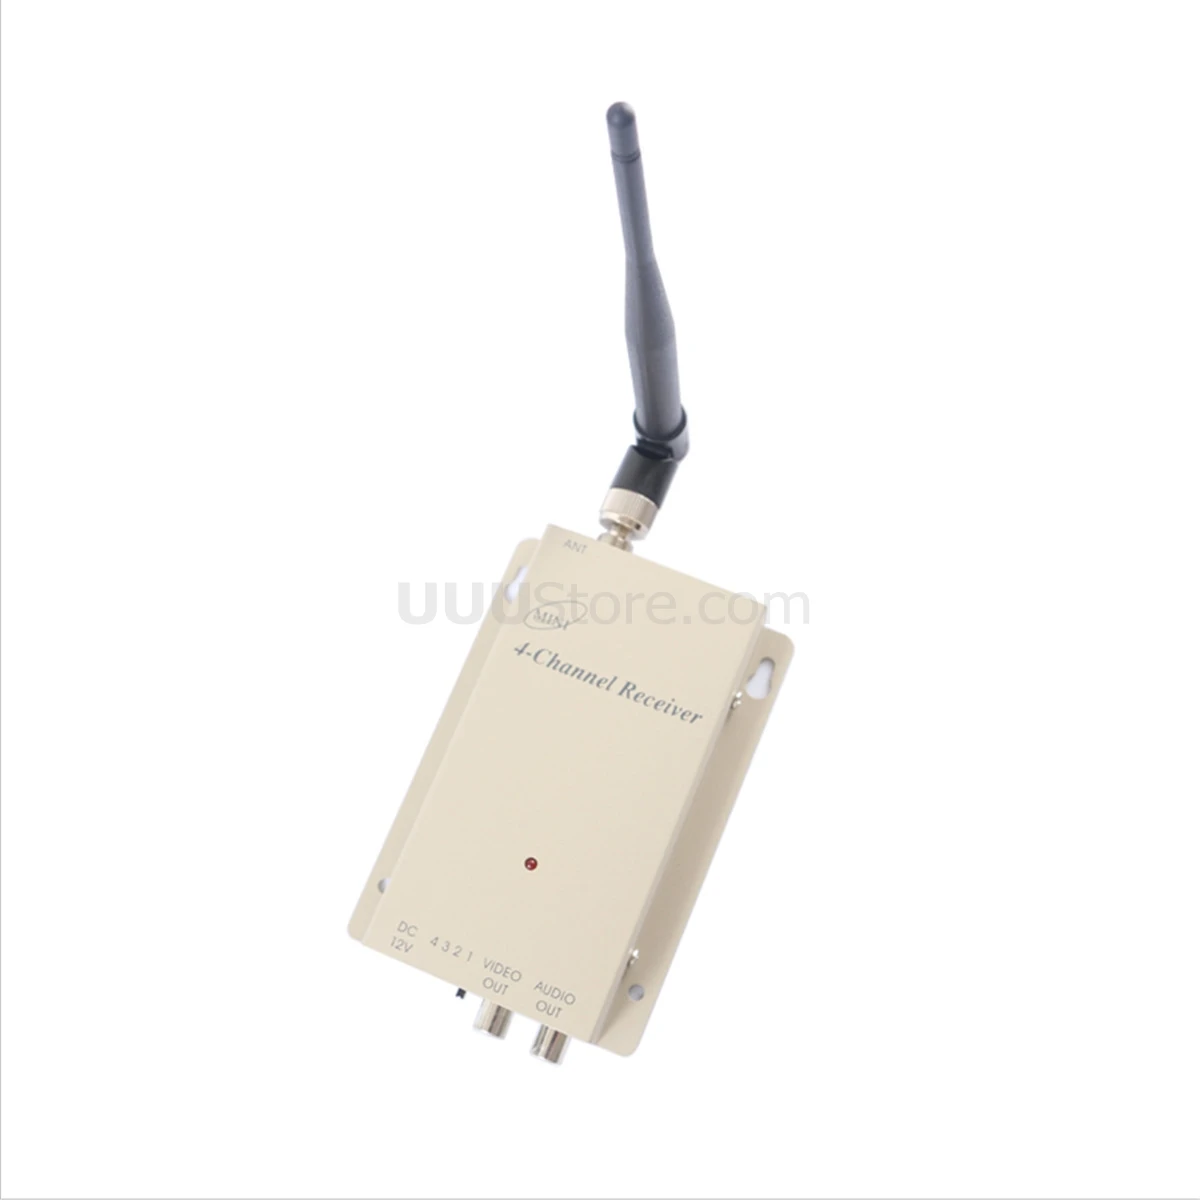 1.2G Wireless video and audio receiver wireless camera AV receiver 1200mhz audio video receiver for FPV receiver 2